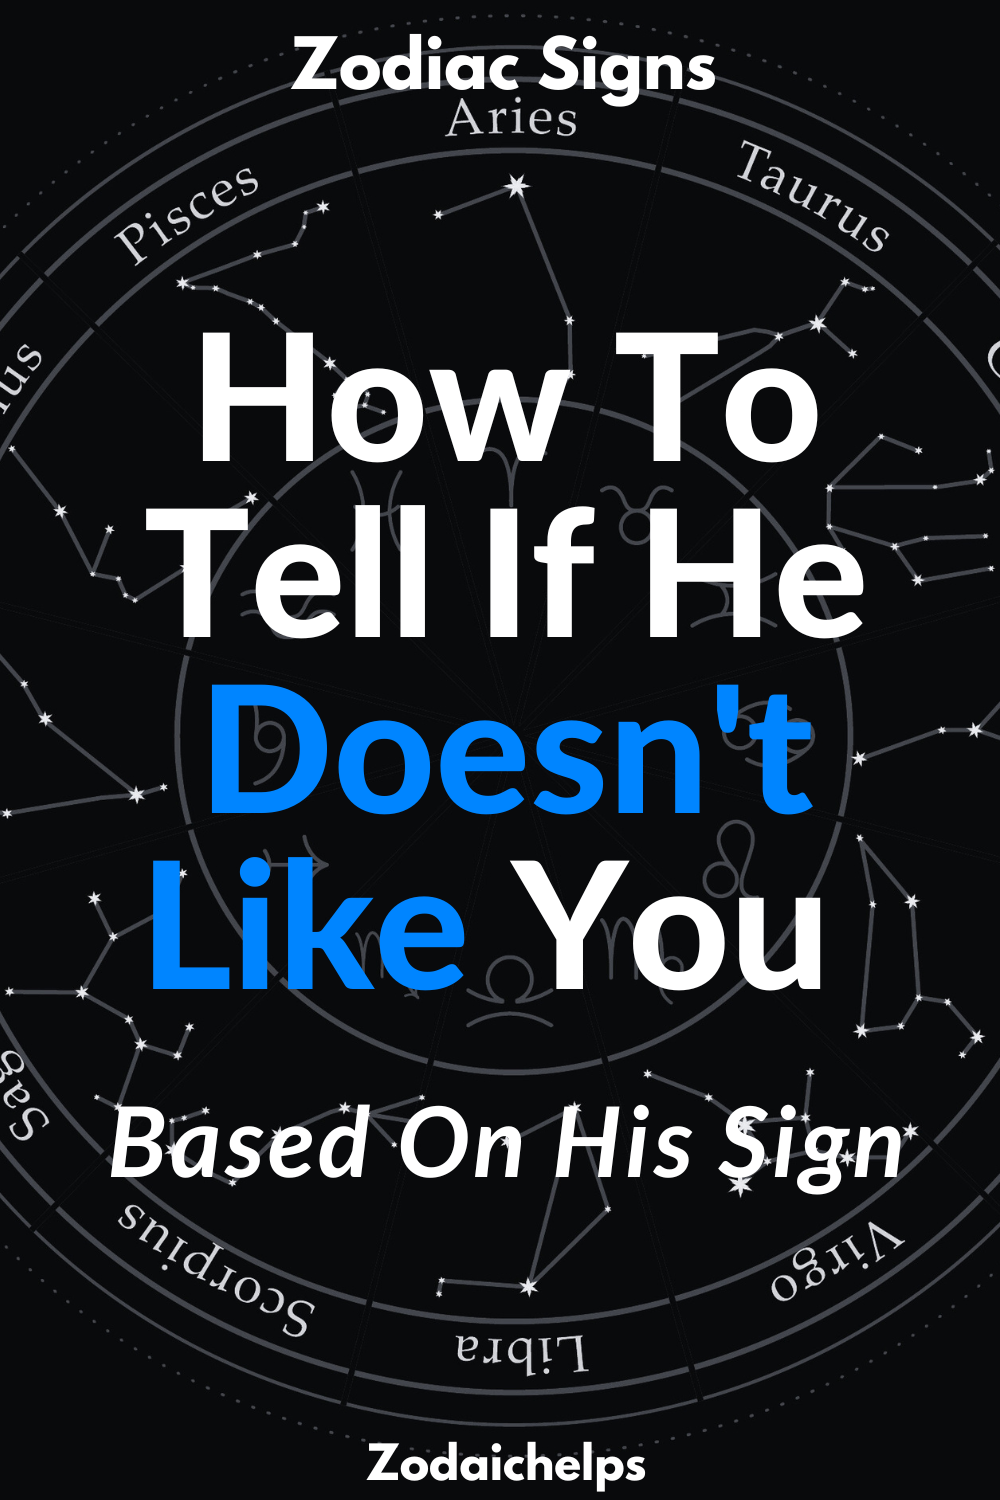 How To Tell If He Doesn't Like You Based On His Sign